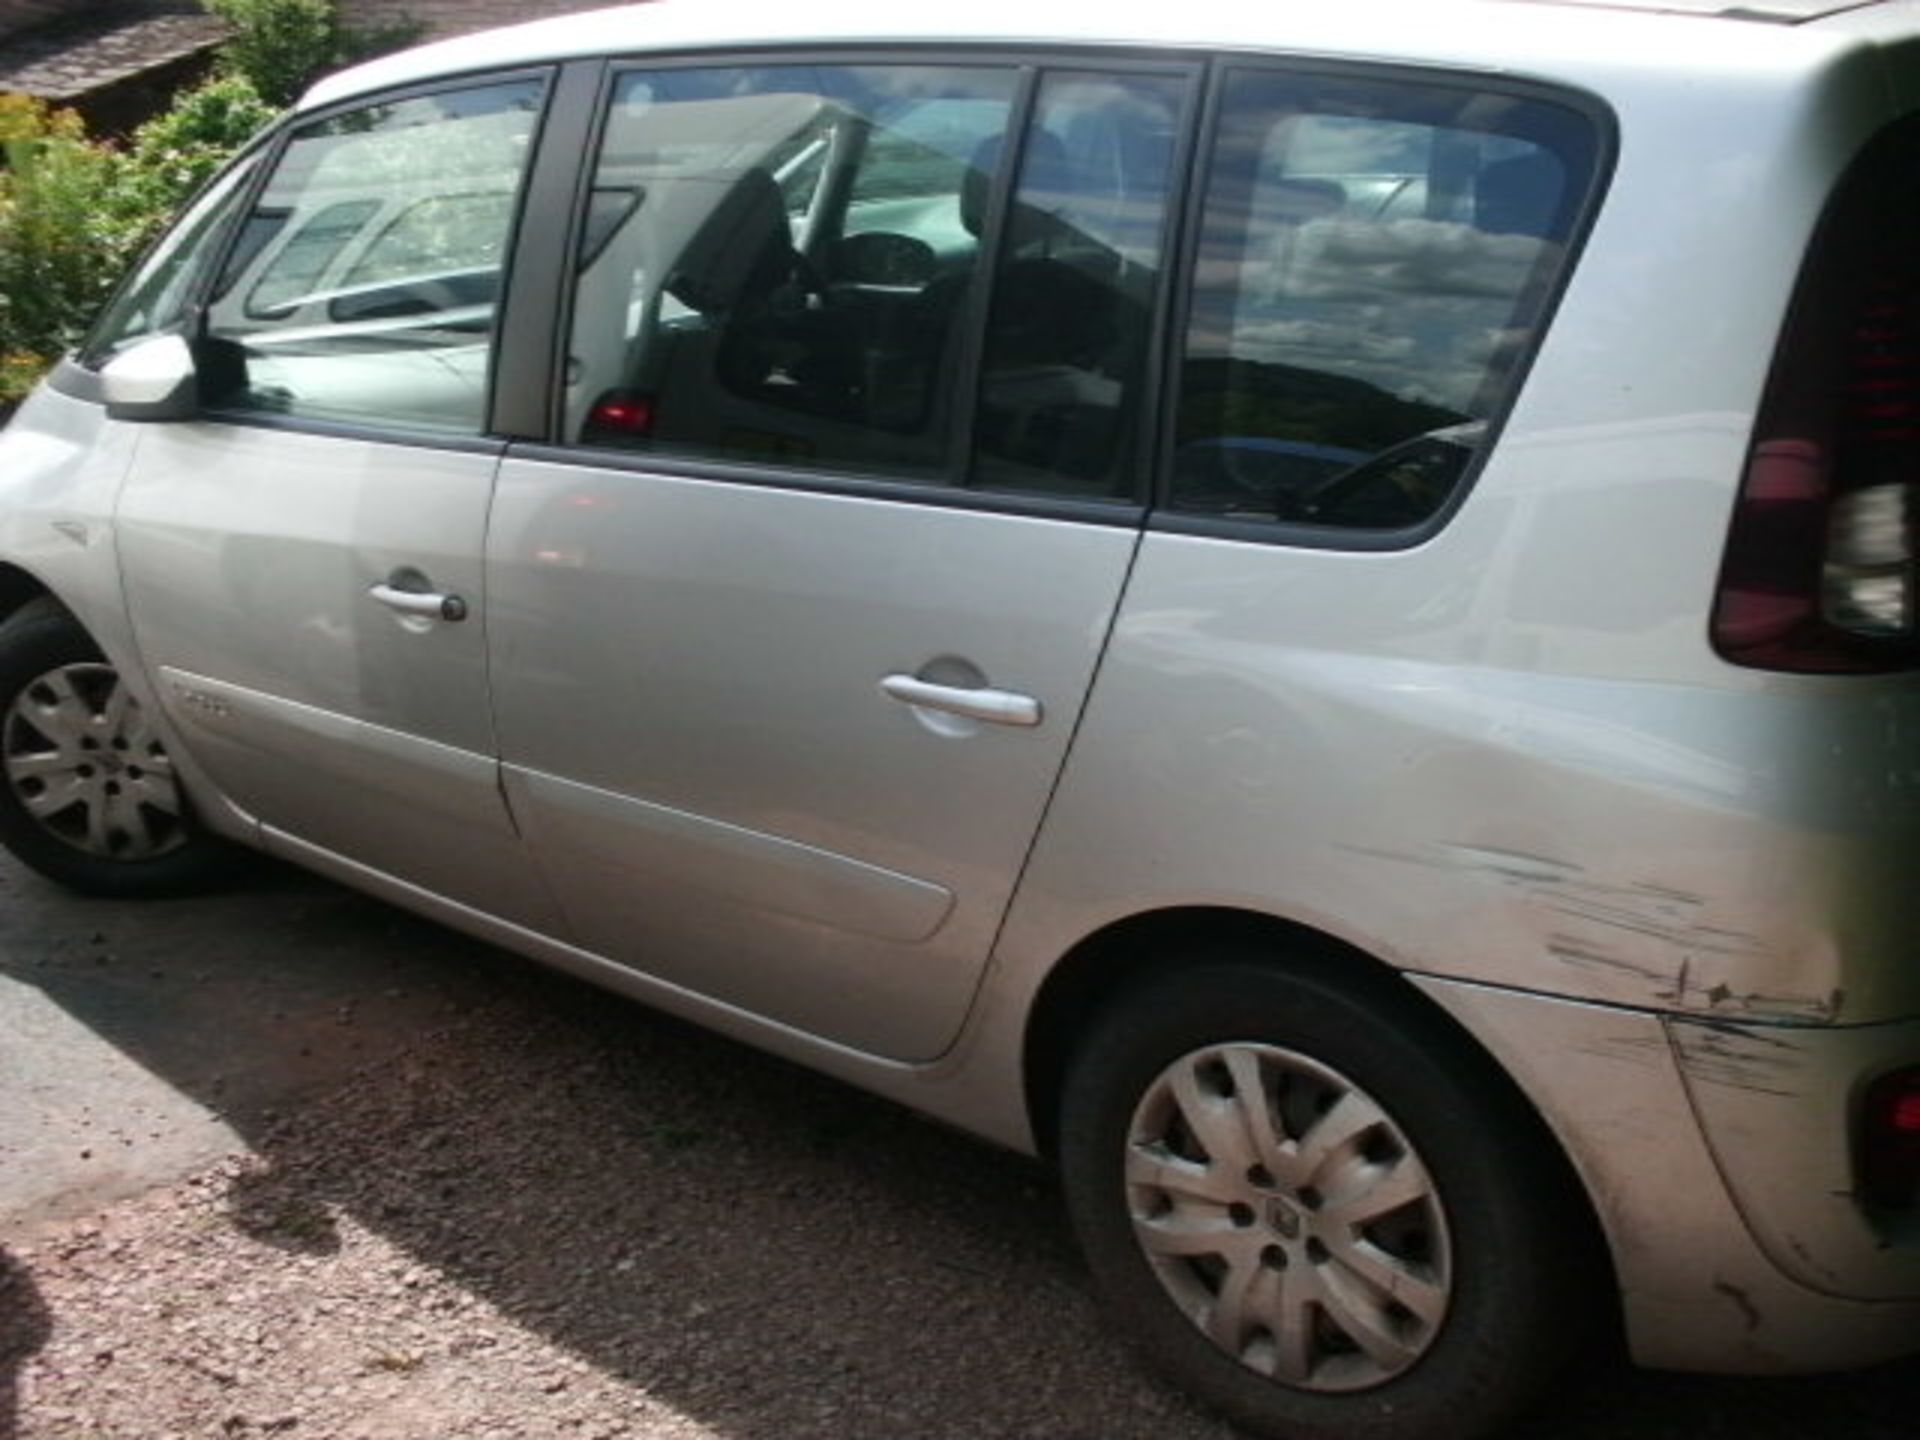 2009 (March) RENAULT ESPACE TEAM Dci 130 MPV, silver, diesel, 1995cc, 259,553 miles recorded, - Image 2 of 3